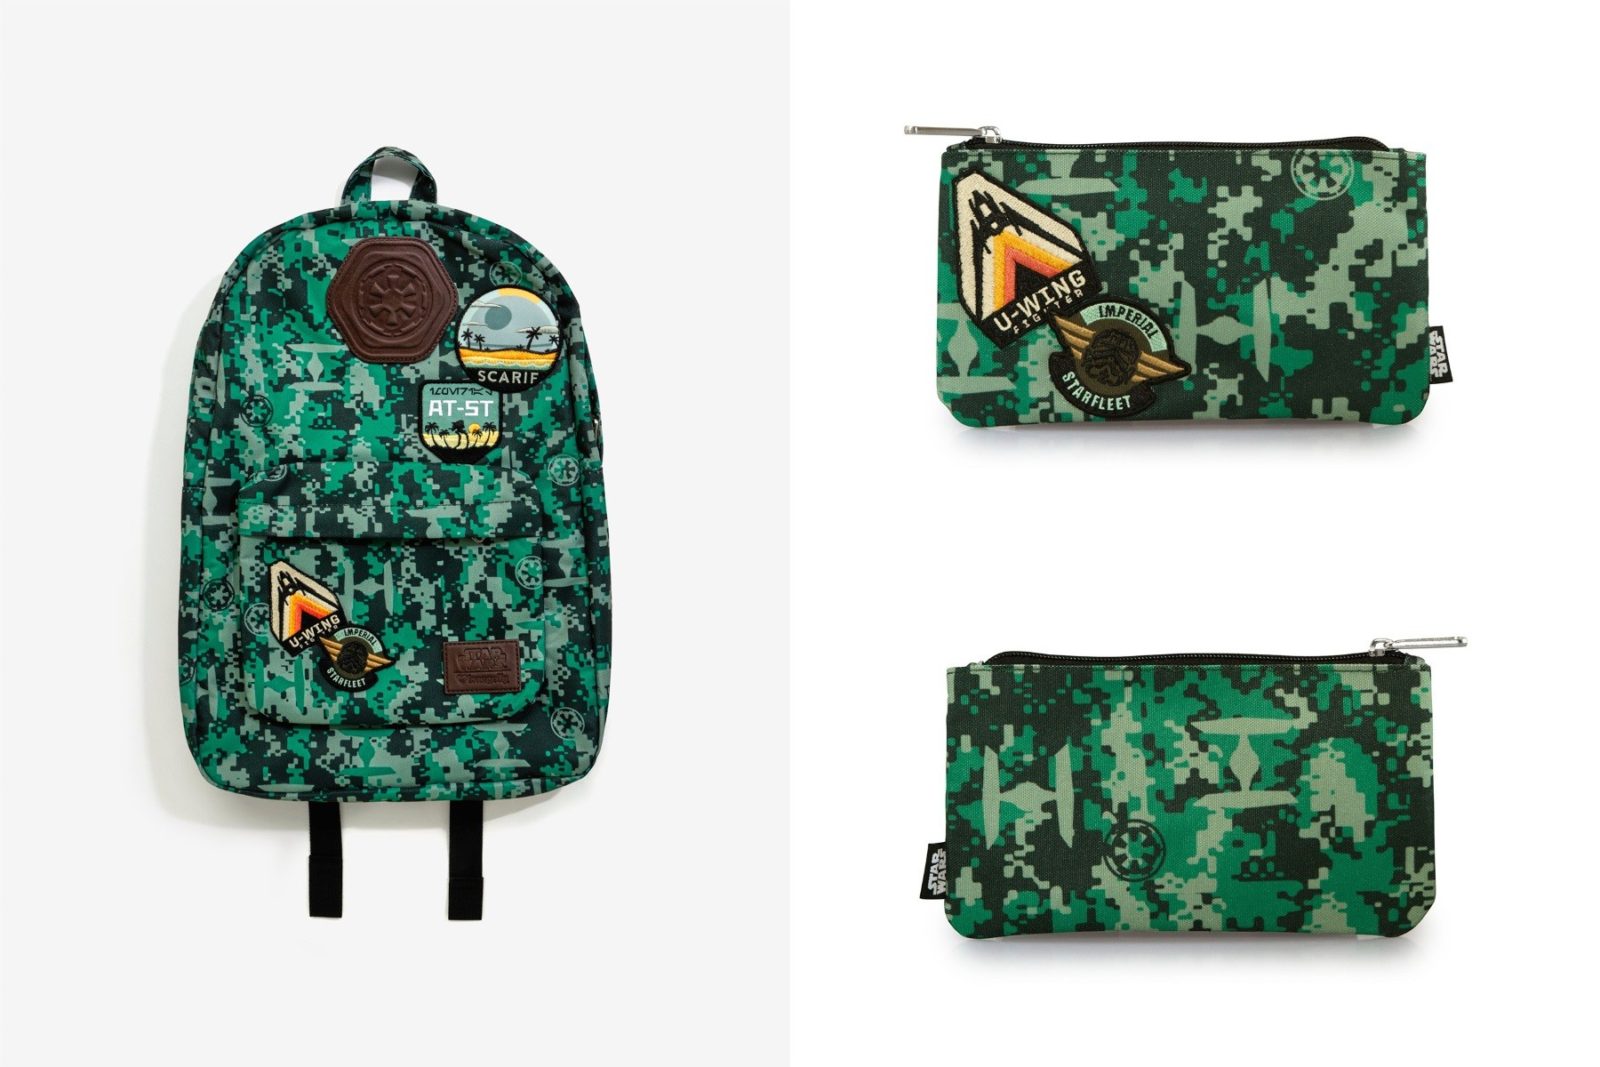 New Loungefly x Rogue One camo bags